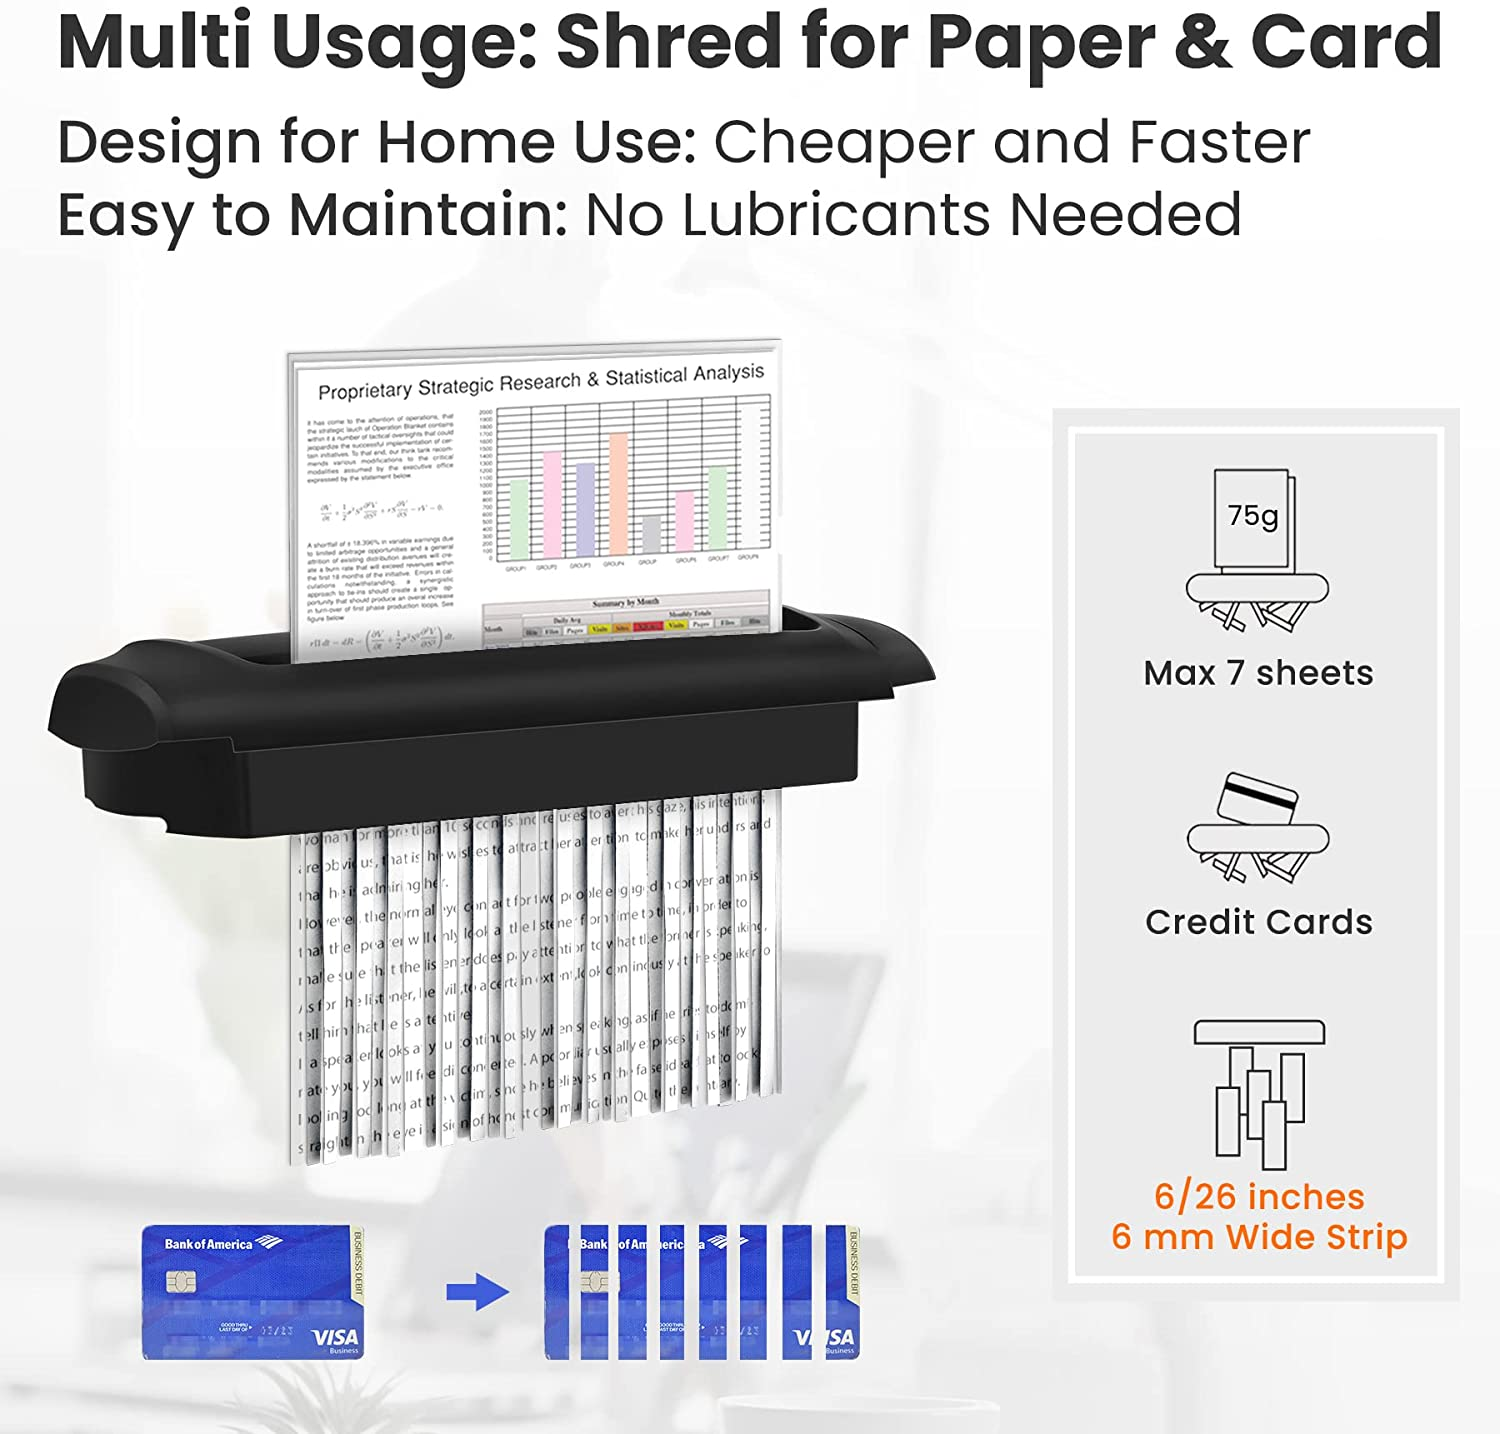 Paper Shredder without Basket, 7-Sheet Strip Cut Shredder, Paper Shredder Also Shreds Card/Staple, Small Portable Shredder with Extendable Arm, Durable&Fast with Jam Proof(Etl)